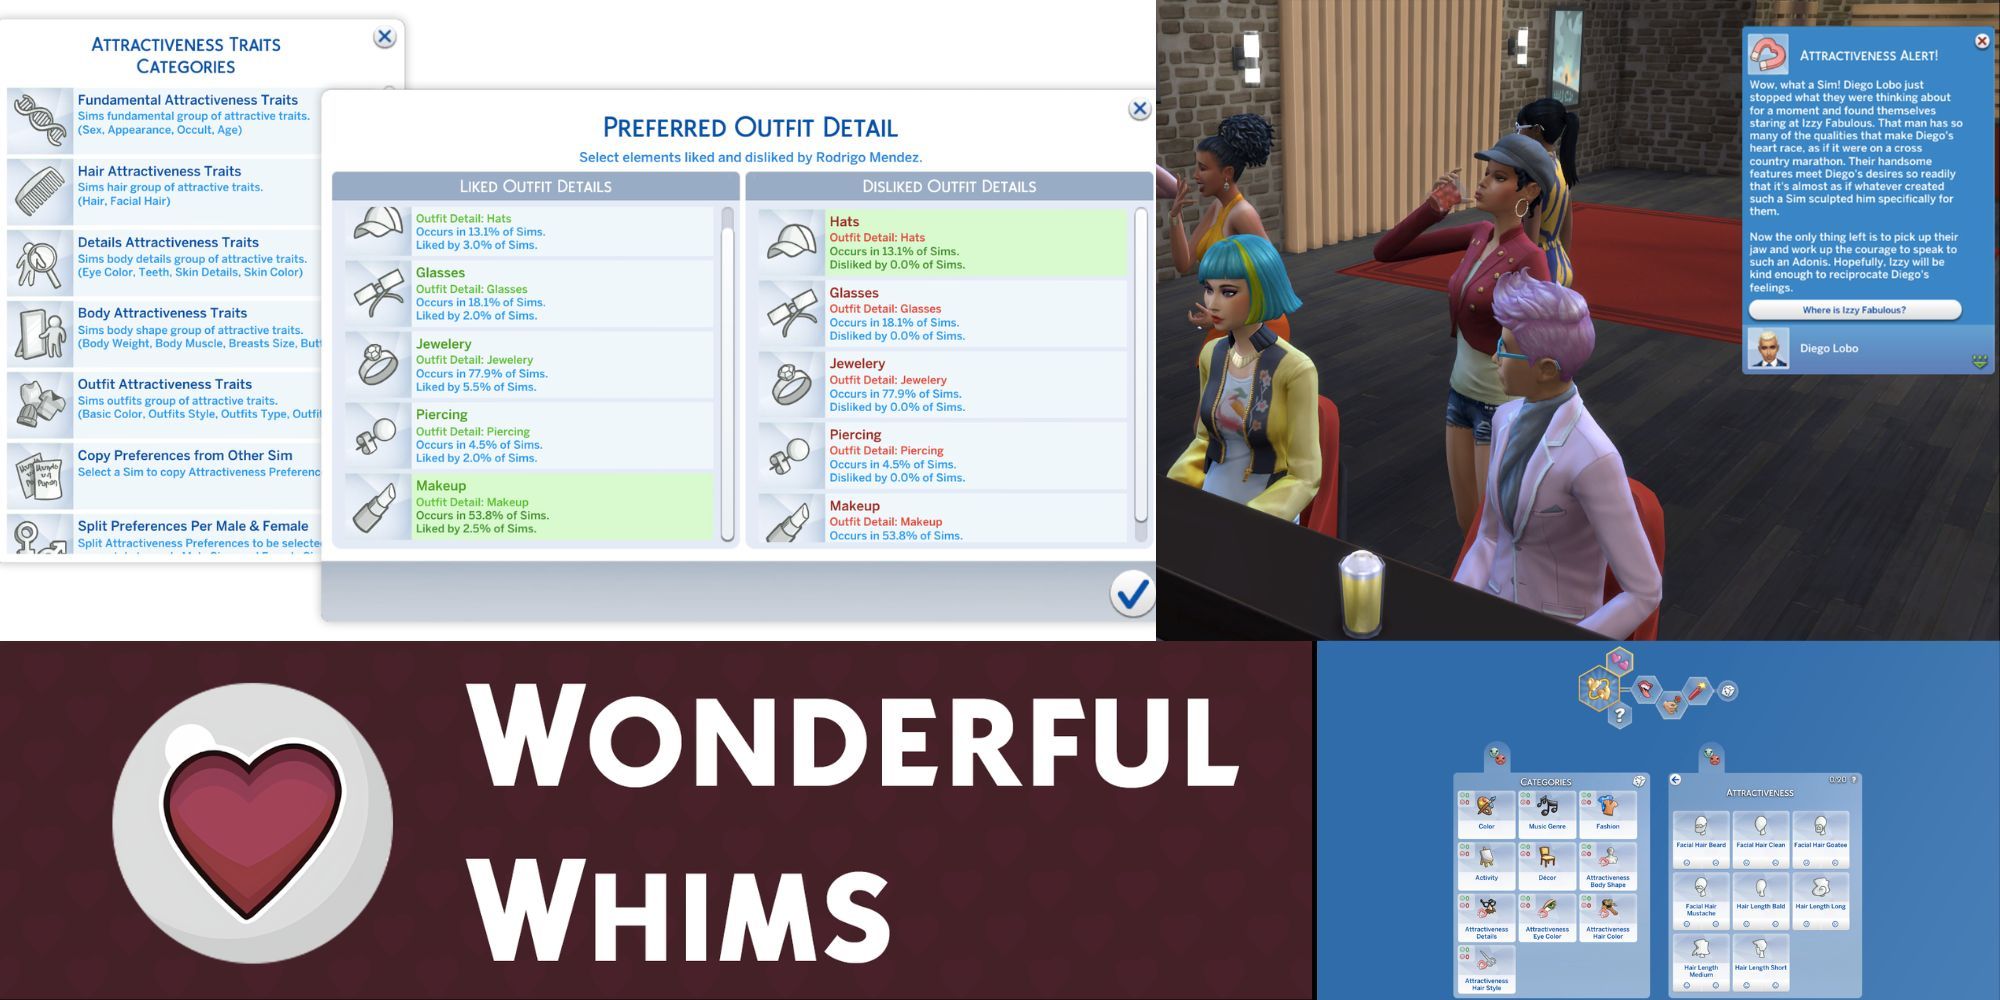 The Sims 4 Wonderful Whims